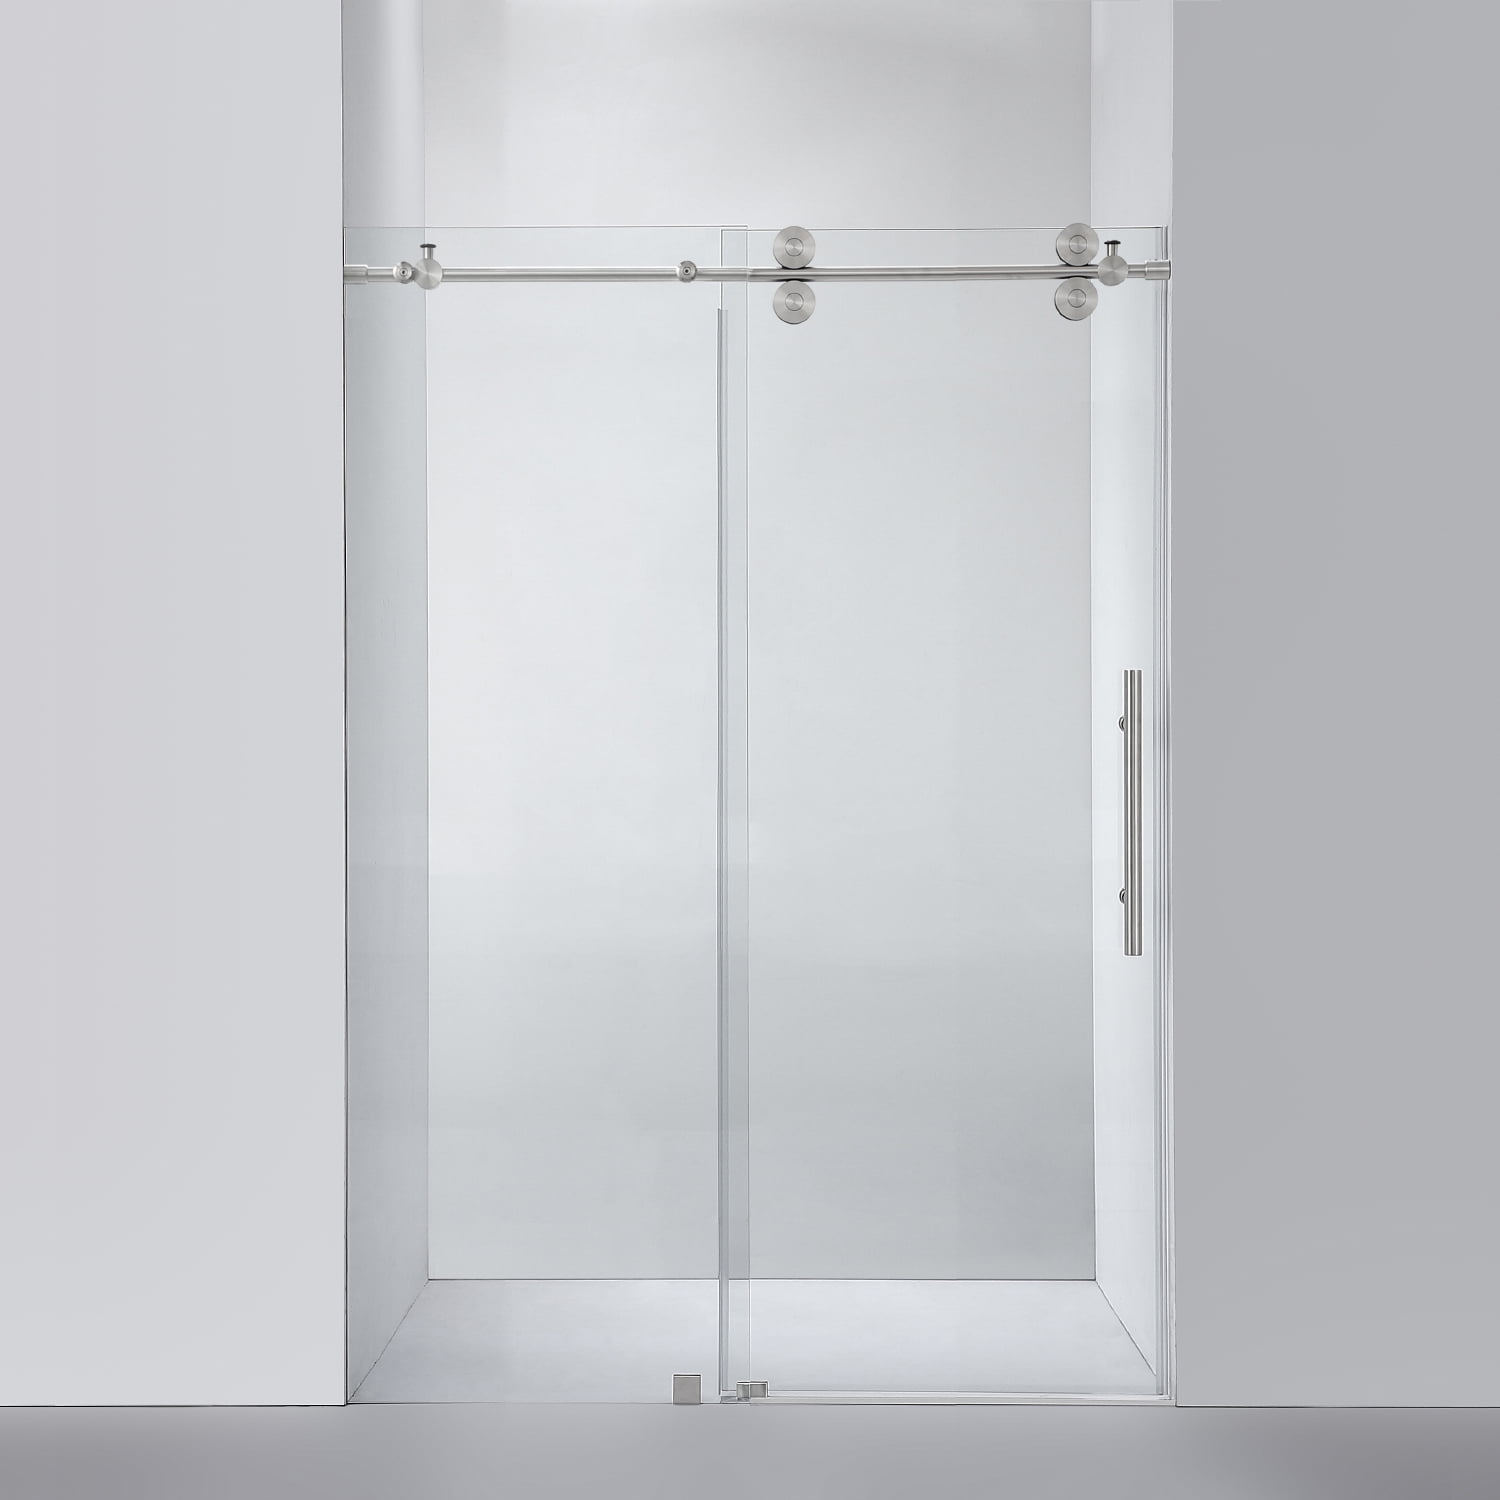 Details about   Line Products M 6219 Sliding Shower Door Bottom Guide For 7/16 in Thick Doors 